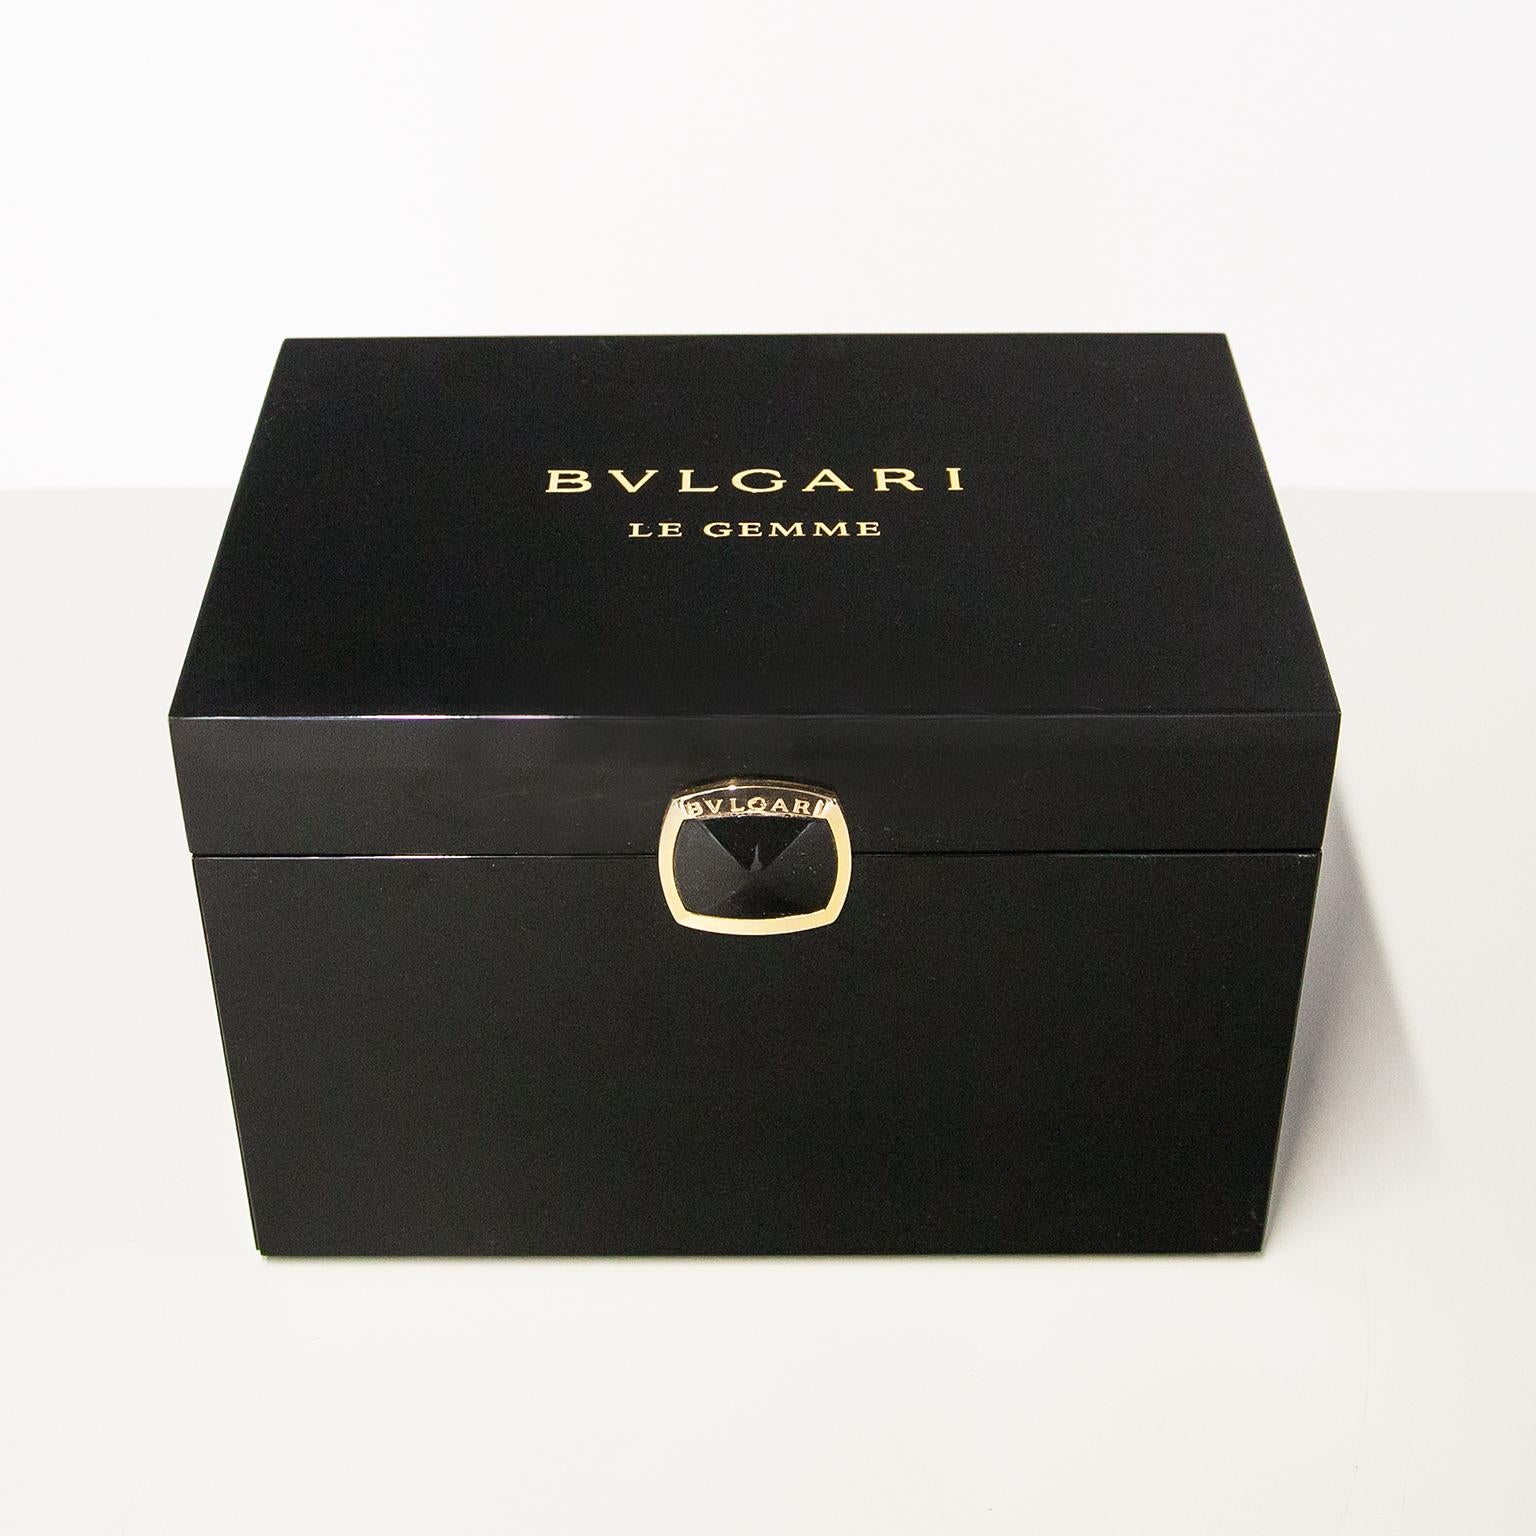 We present to you a beautiful large Chinese lacquer gemstone box from the traditional jewelry brand Bvlgari in excellent condition. This high-quality box is made of highly polished Chinese lacquer and has a gold-plated Bvlgaria buckle as a closure